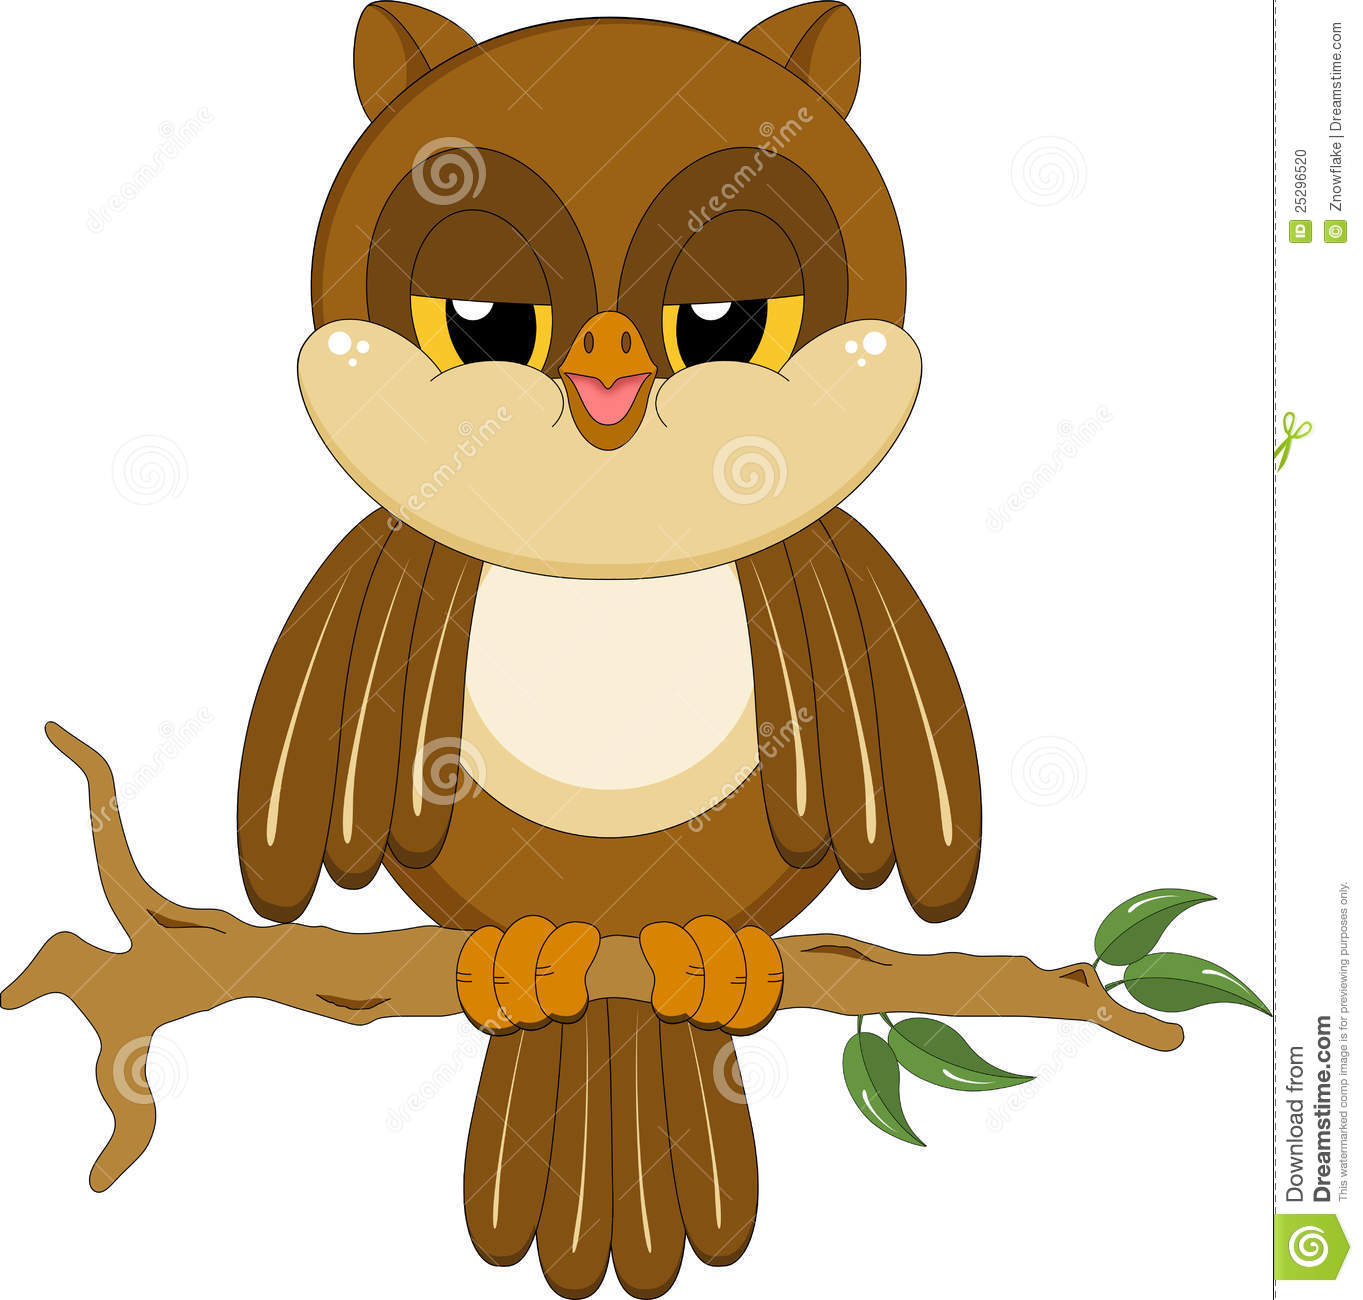 An Illustration Featuring An Owl Sitting On A Branch